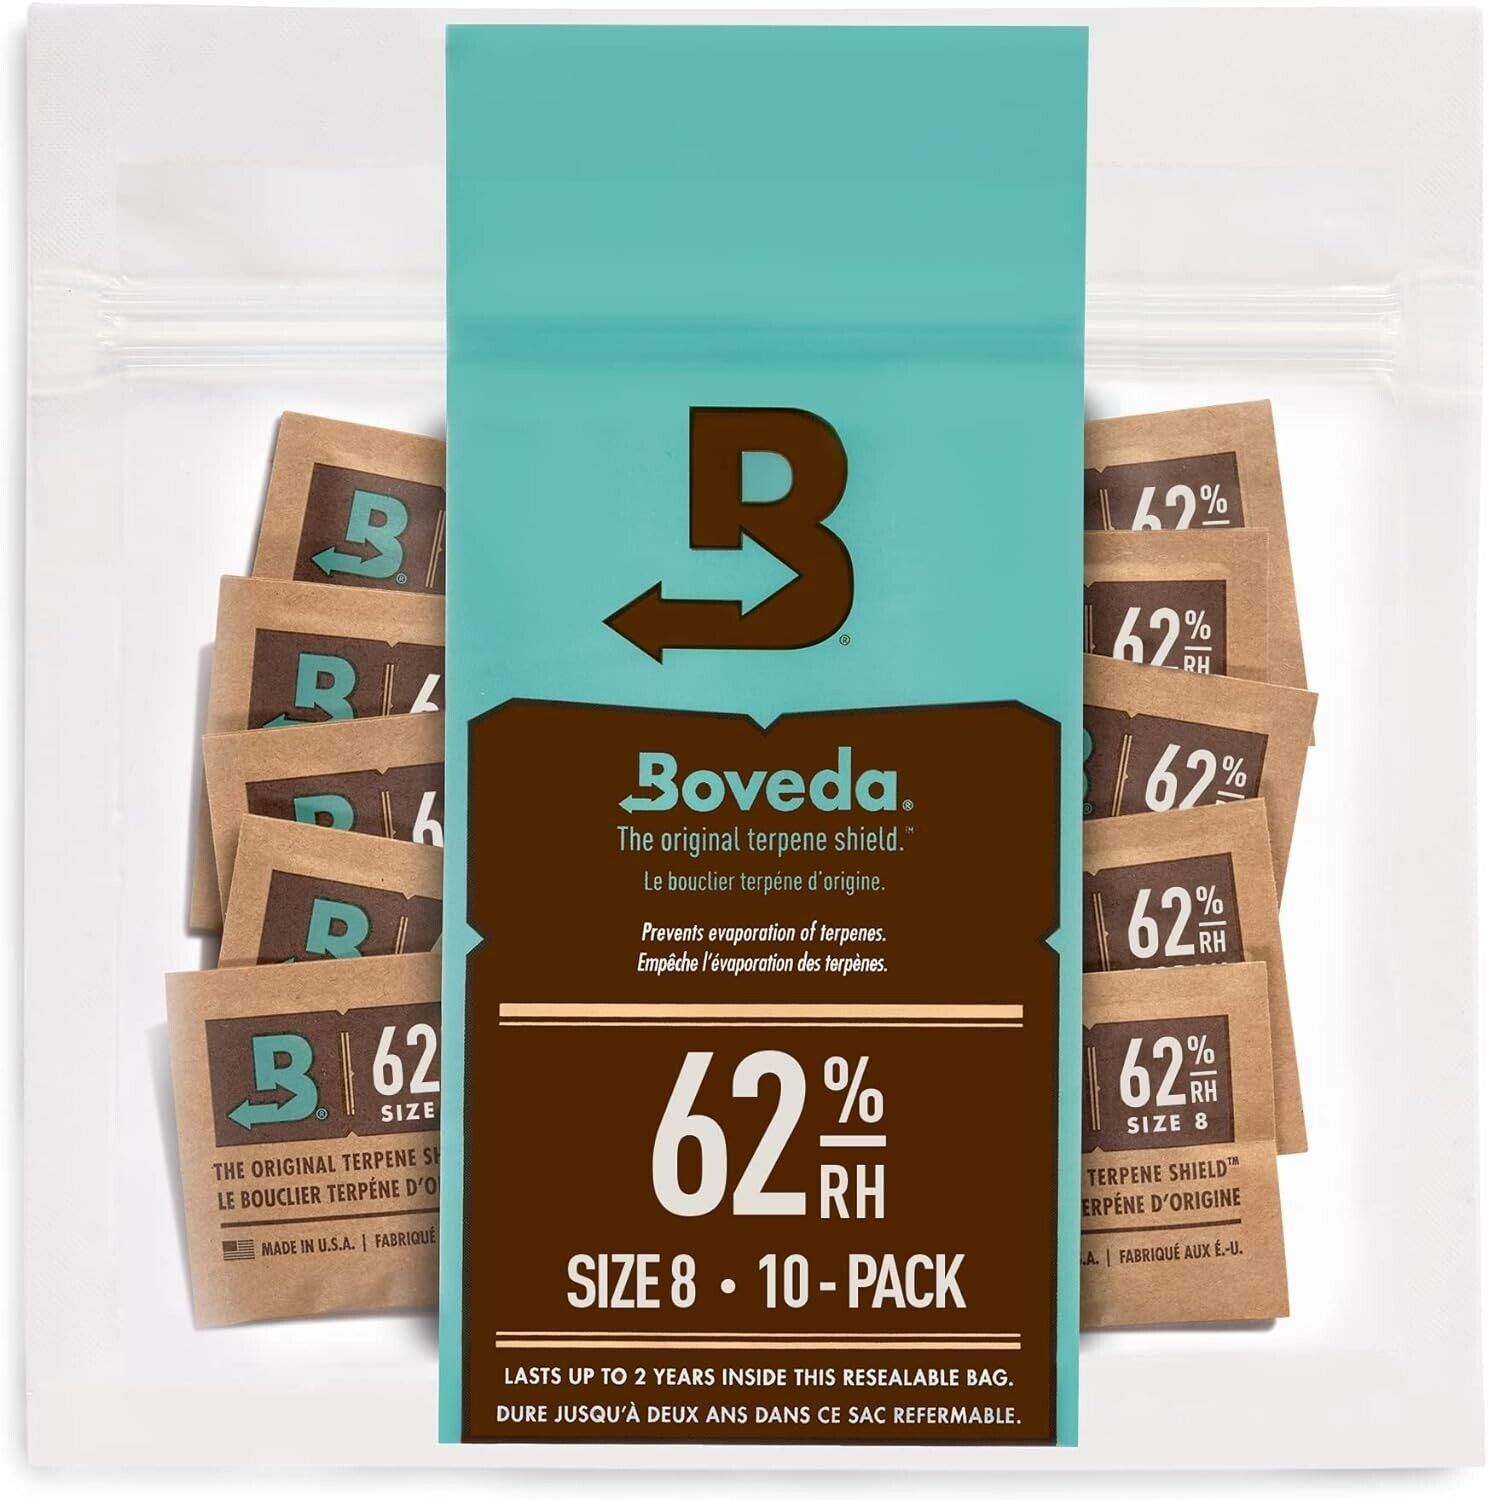 Boveda 62% RH Size 8-10 Pack Two-Way Humidity Control Packs - For Storing 1 oz